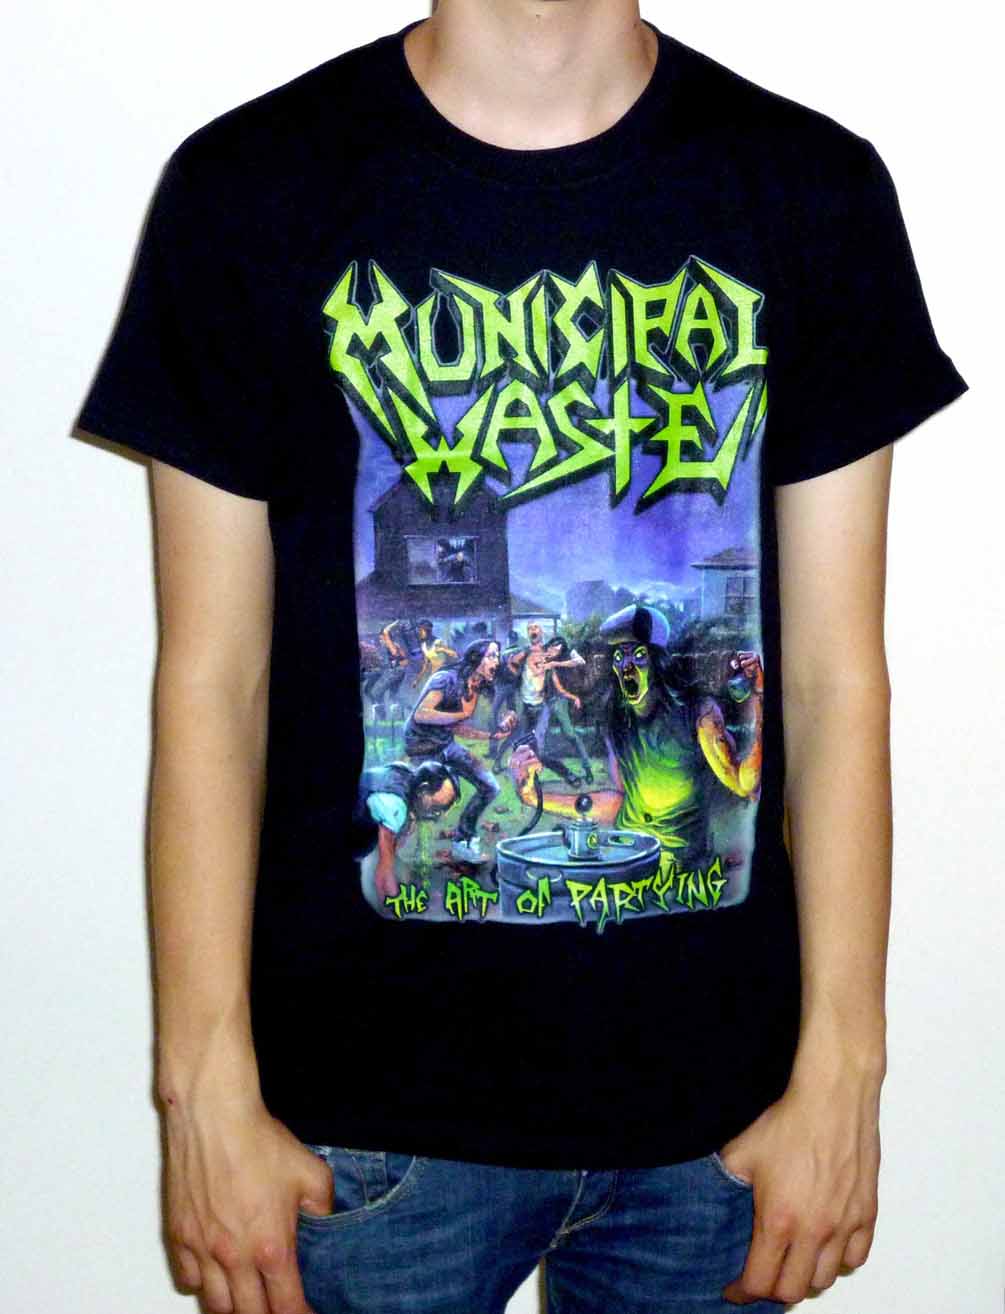 Municipal Waste "The Art Of Partying" Black T-shirt